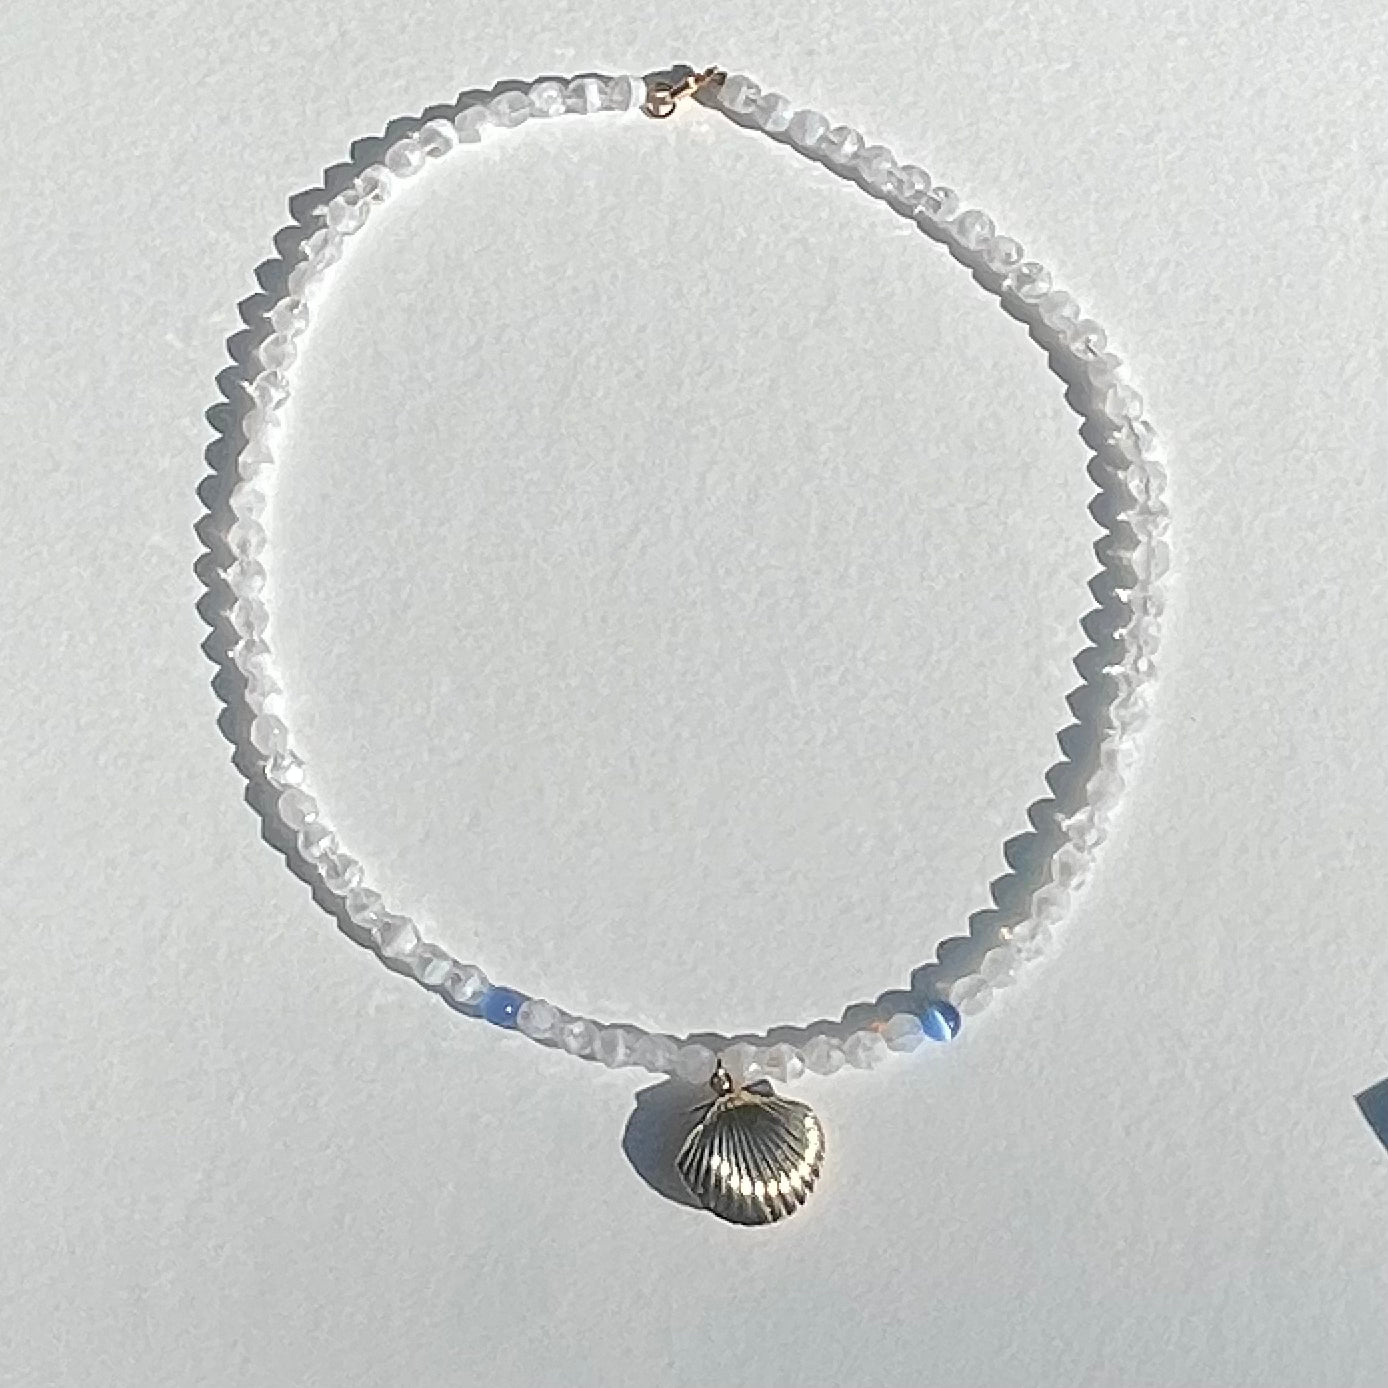 The Luke necklace a white and periwinkle blue glass beaded necklace with seashell gold locket